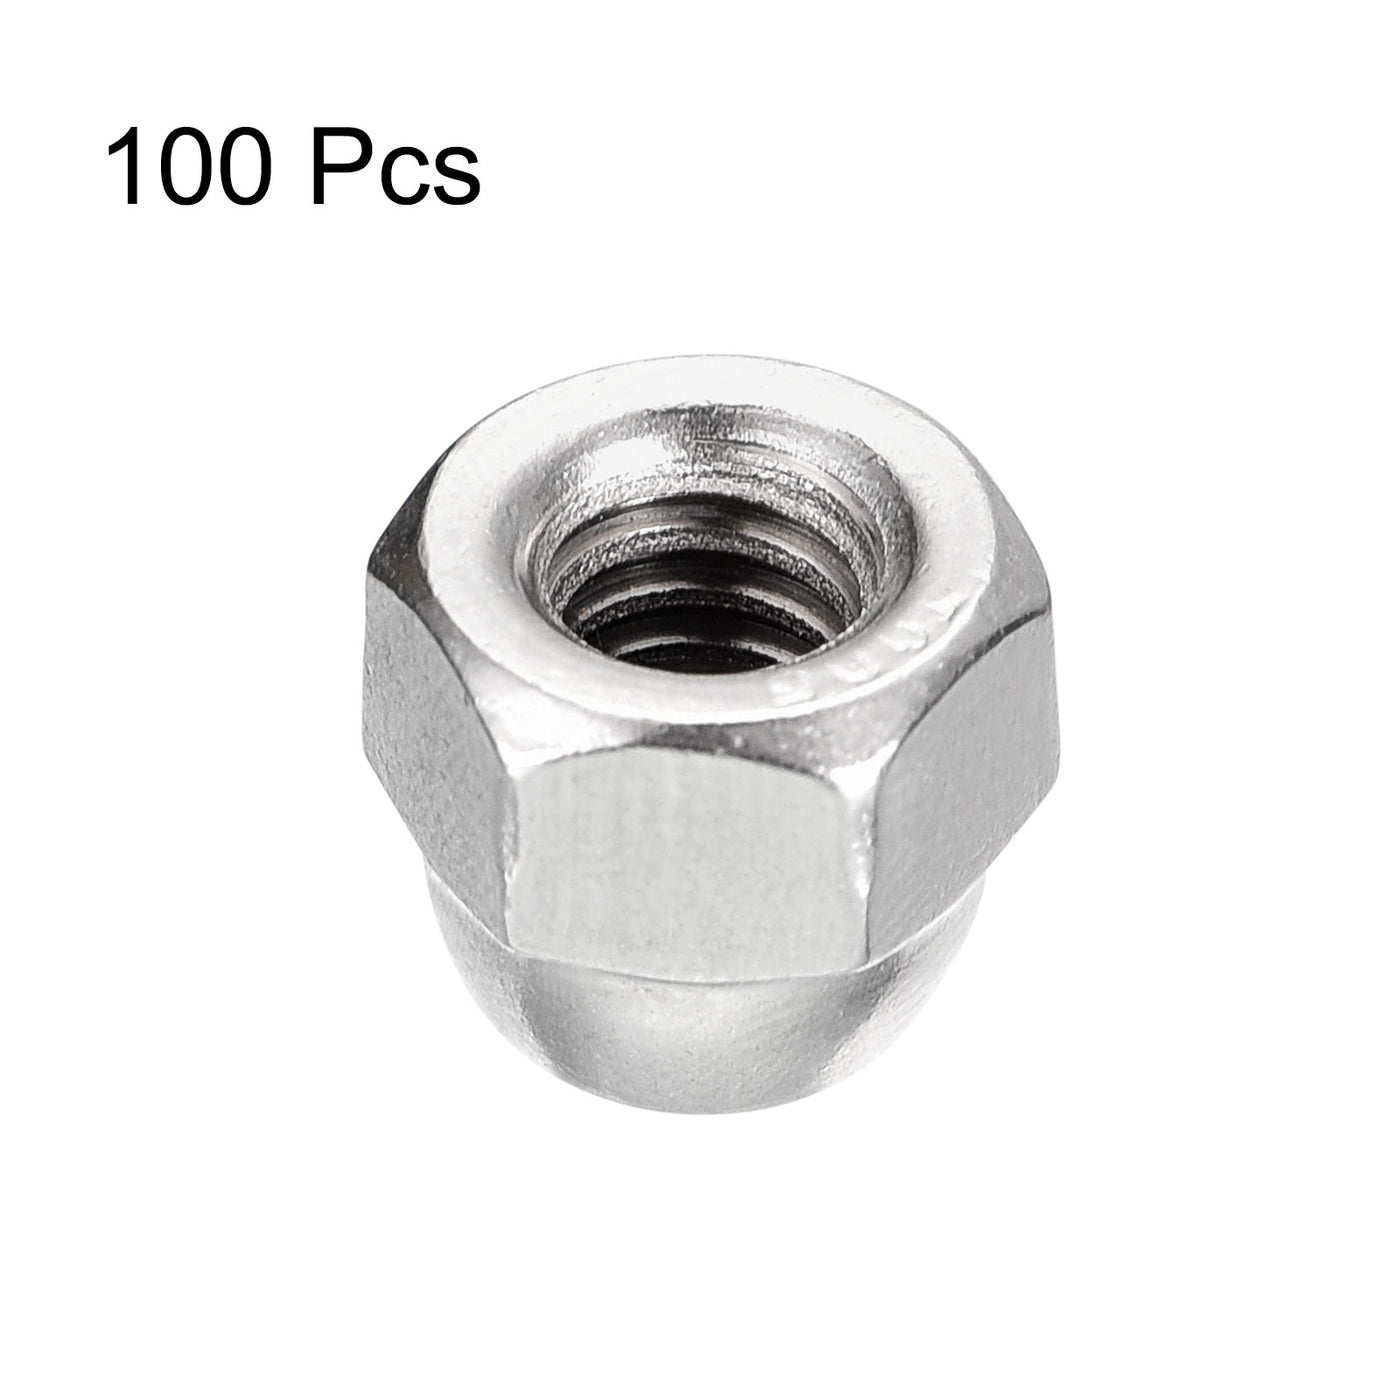 uxcell Uxcell 1/4-20 Acorn Cap Nuts,100pcs - 304 Stainless Steel Hardware Nuts, Acorn Hex Cap Dome Head Nuts for Fasteners (Silver)